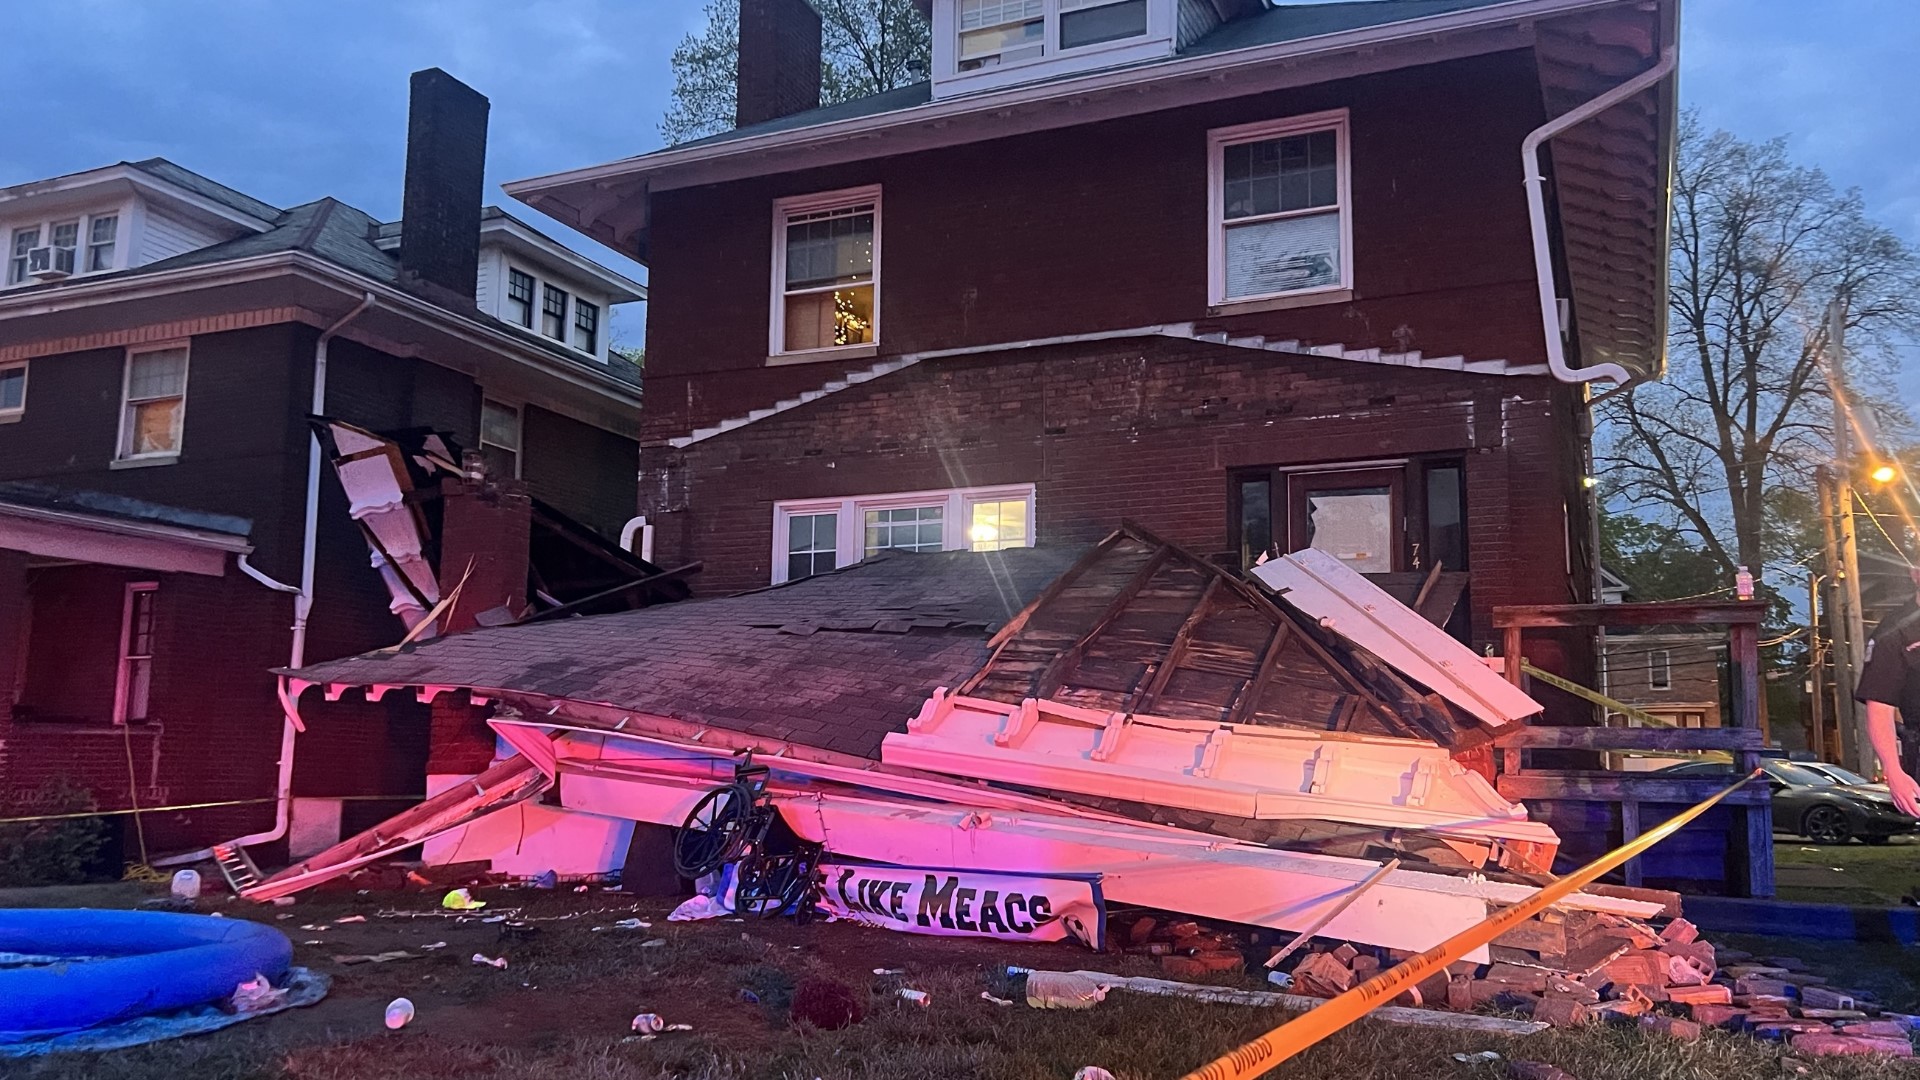 Officers responded to a call of a roof collapsing at a house in the 60 block of East 13th Avenue around 7:40 p.m.